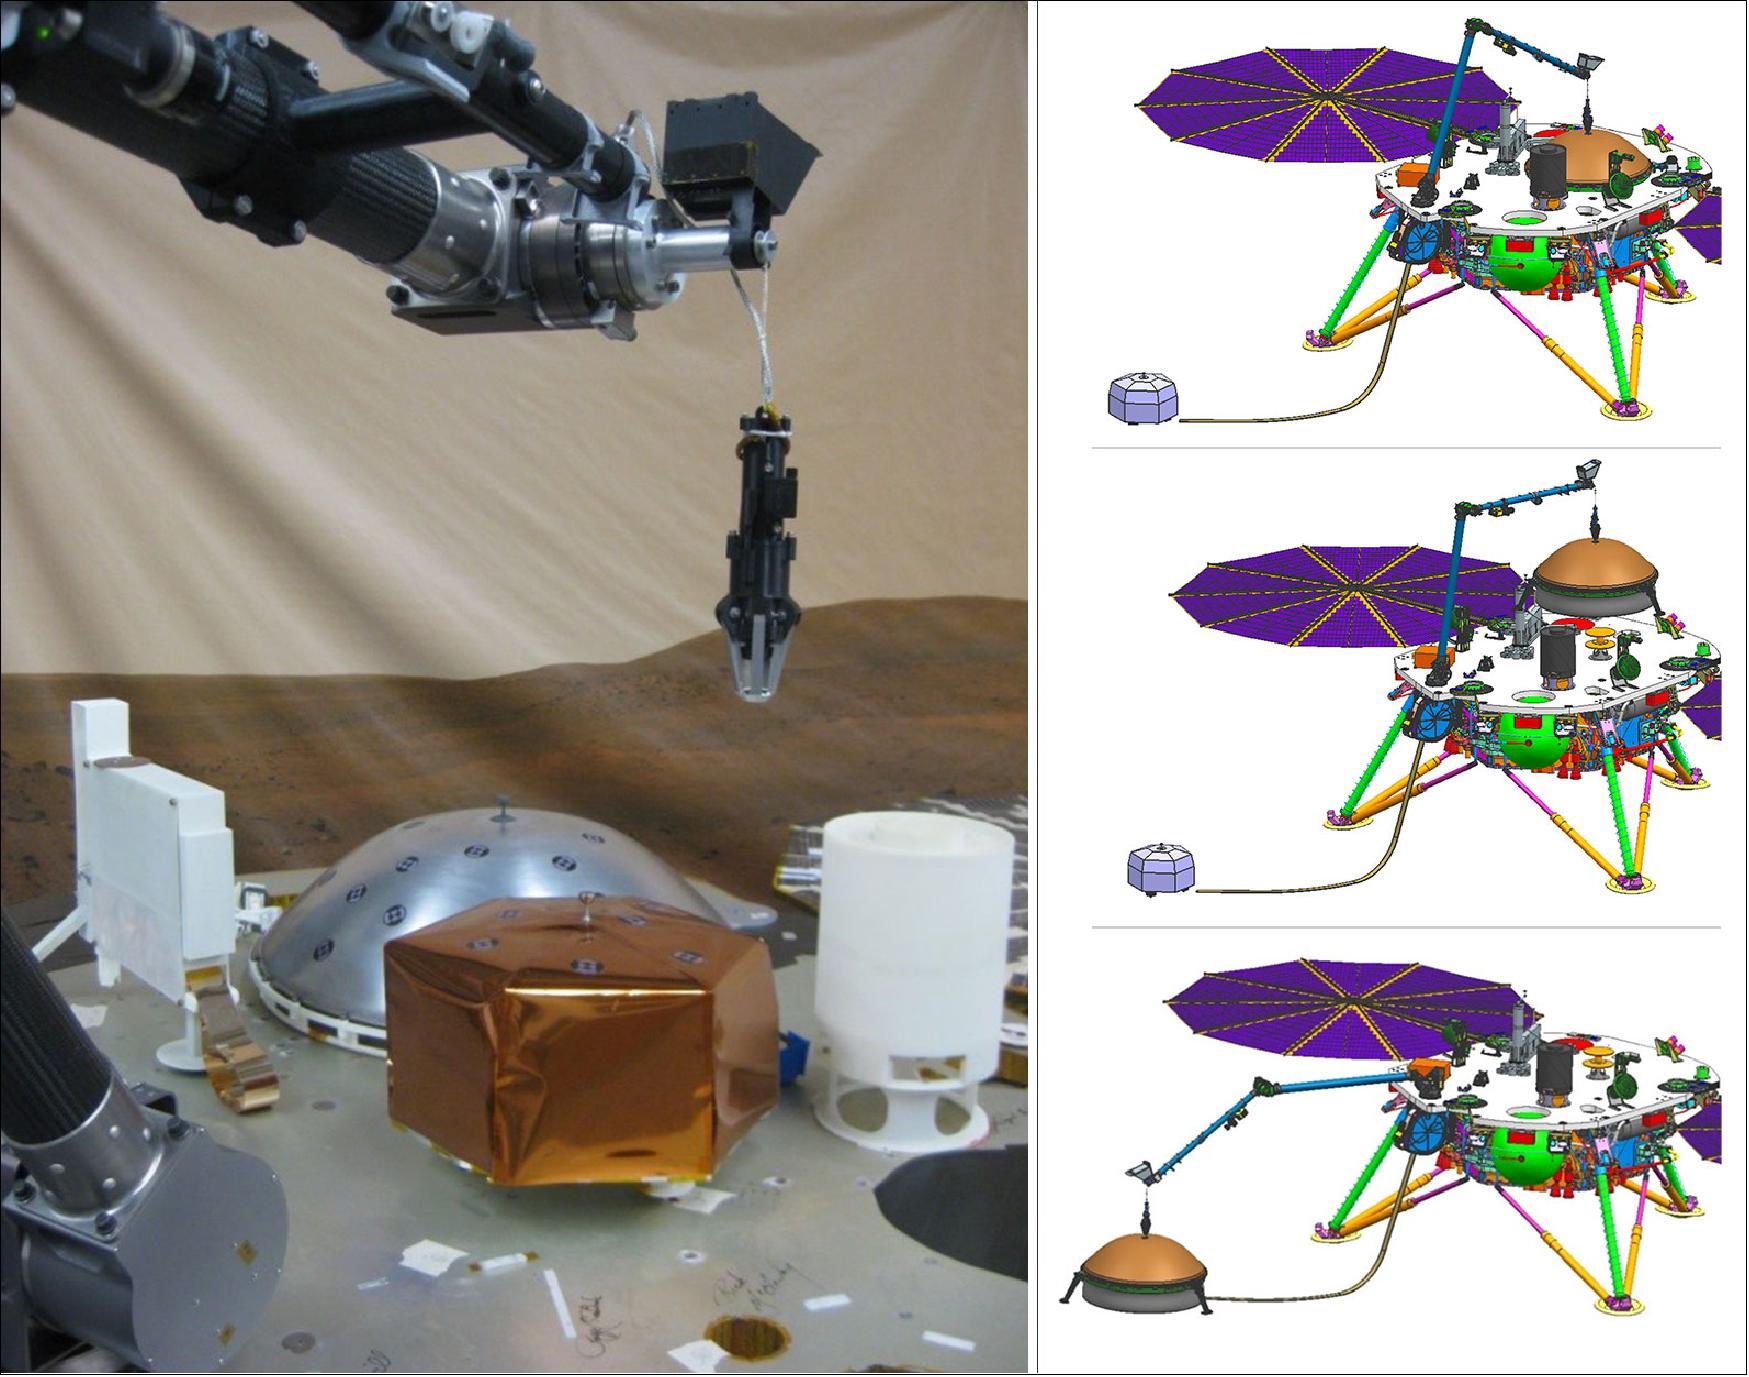 Figure 71: A view of the mockup arm, end effector, and lander top deck of Insight (left), and a sequence of three graphics representing instrument deployment (right), image credit: NASA/JPL